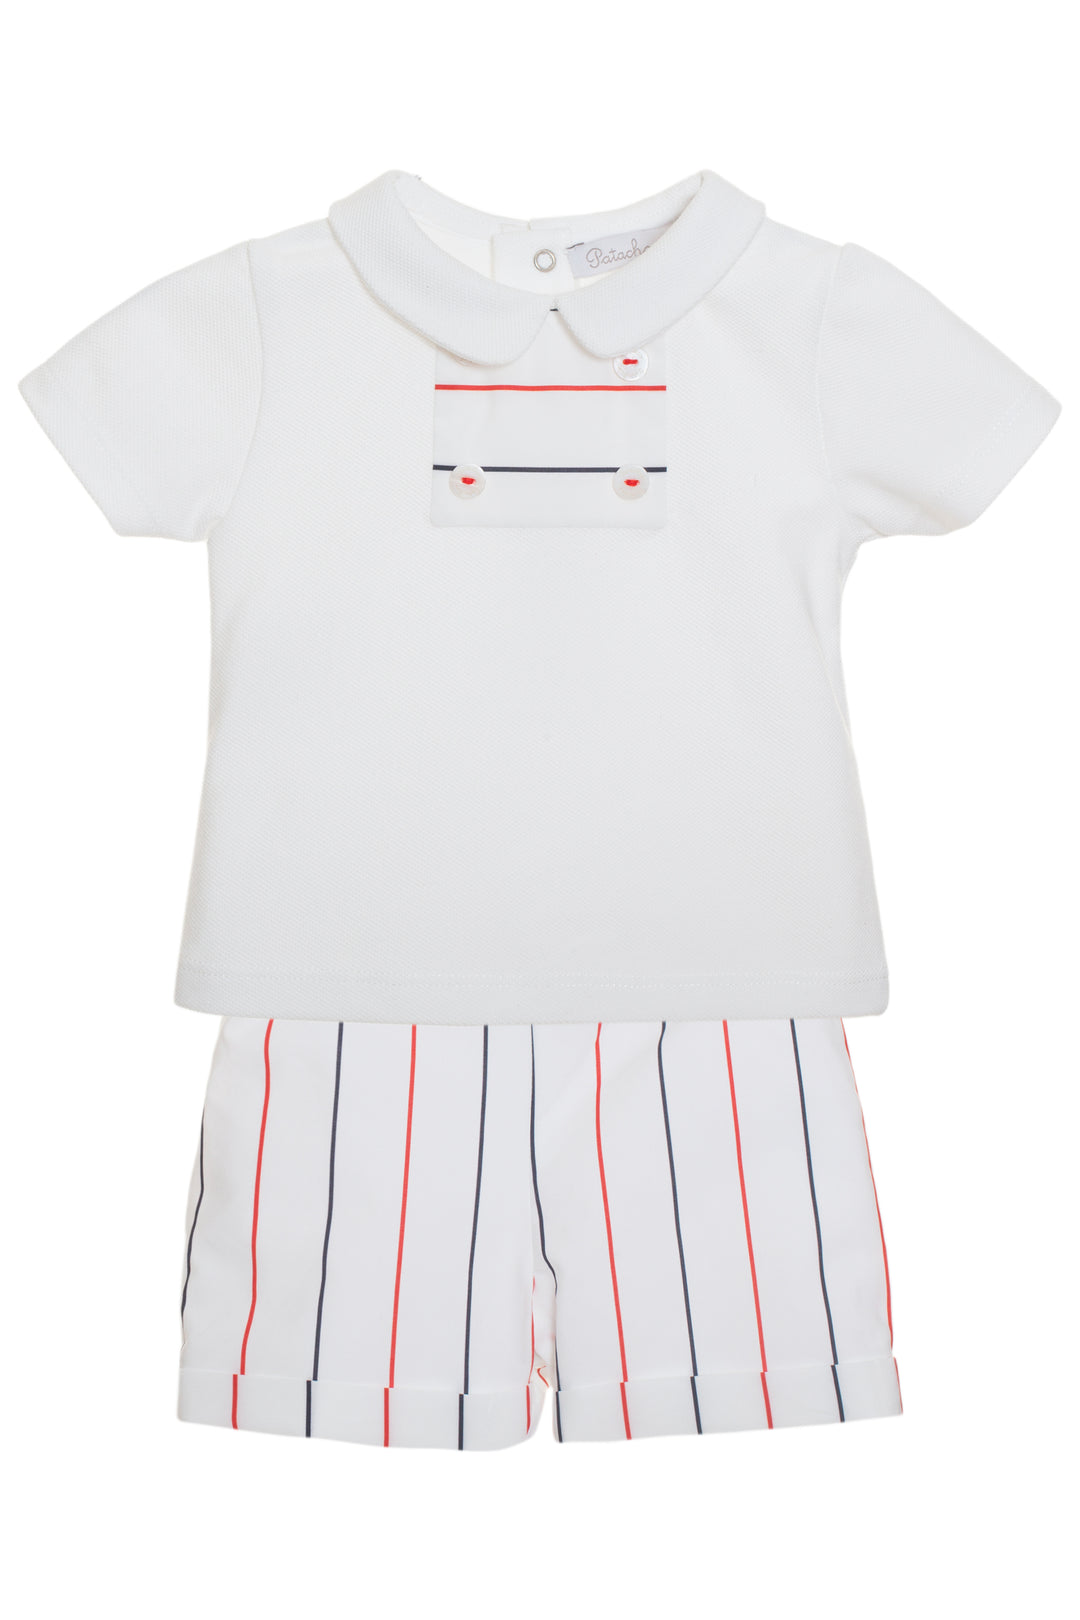 Patachou "Sonny" Red & Navy Striped Top & Shorts | iphoneandroidapplications